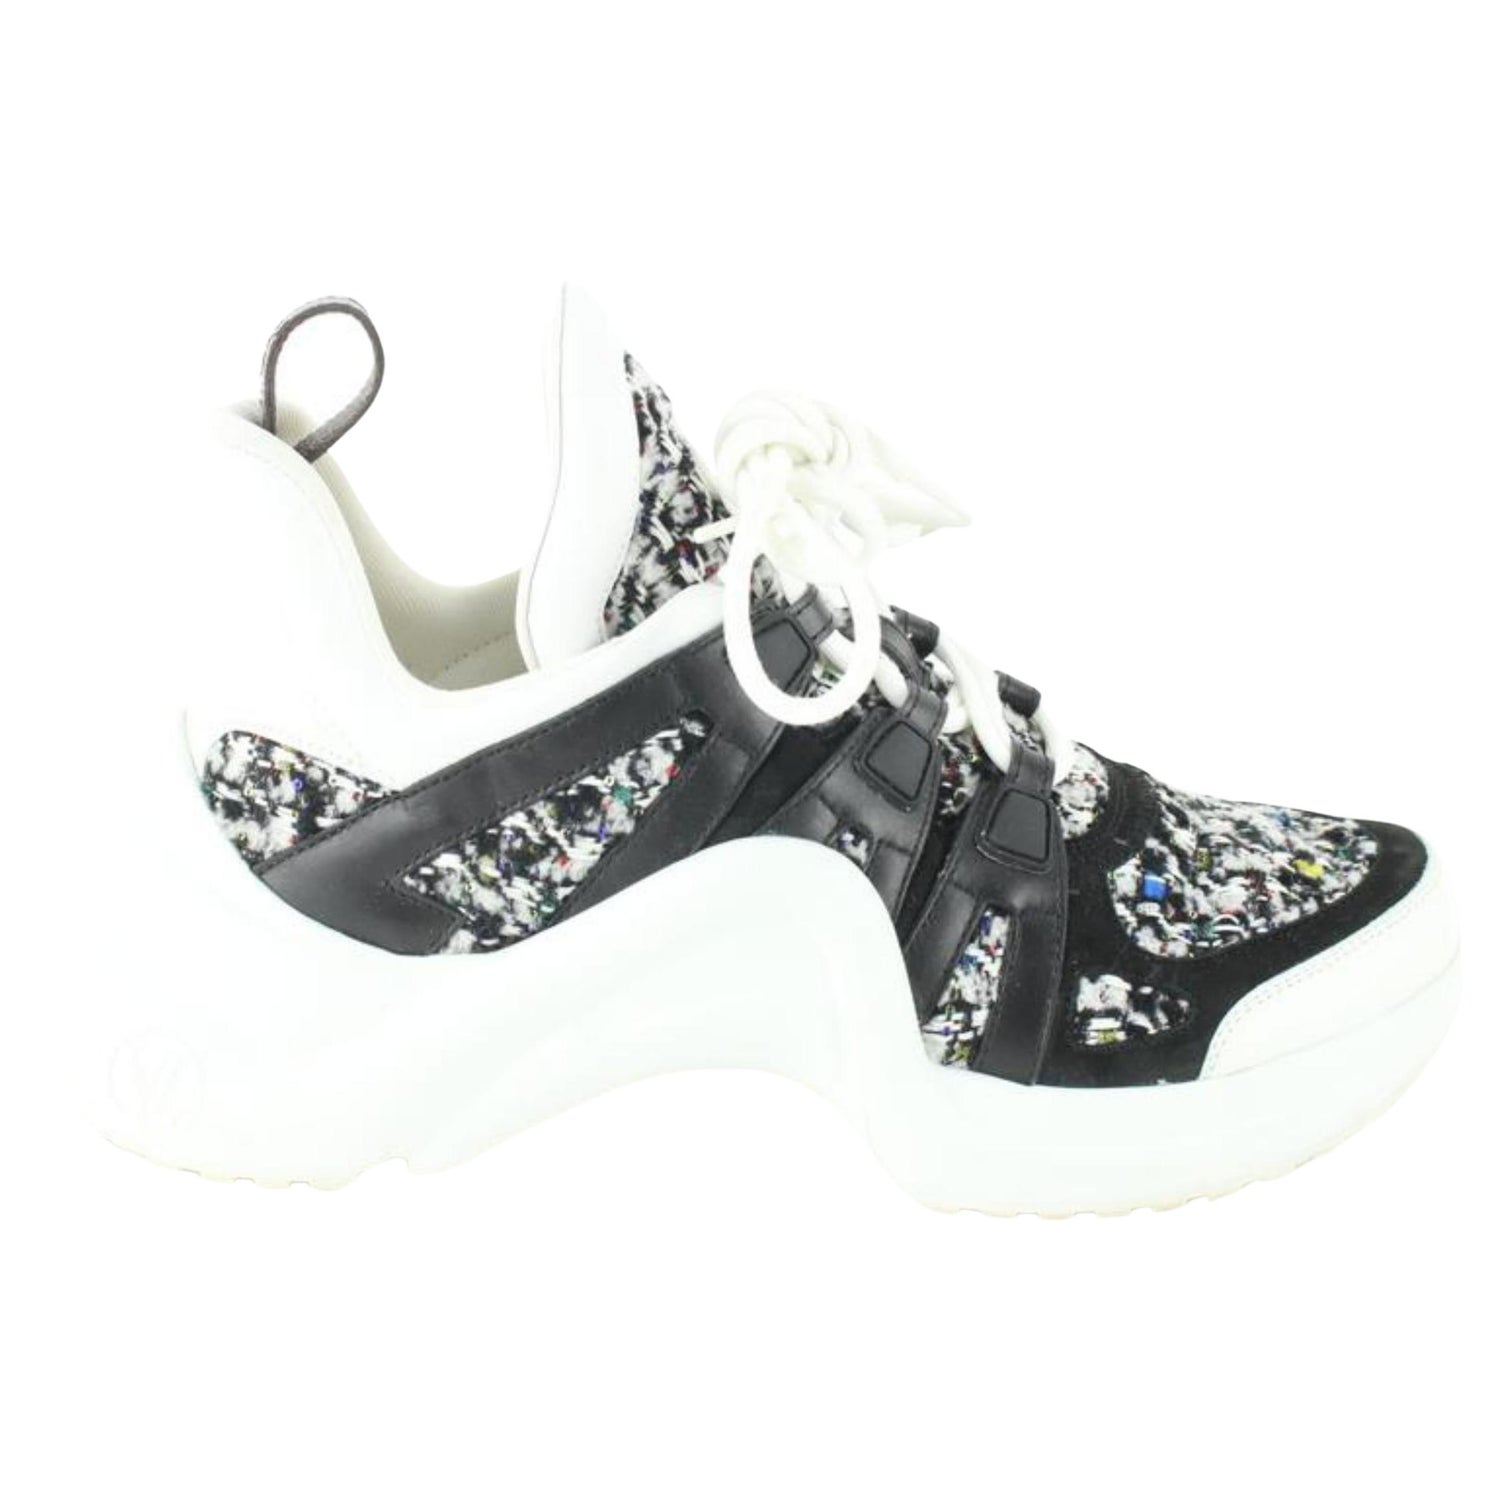 LV sneaker  Louis vuitton shoes sneakers, Girly shoes, Designer sneakers  women